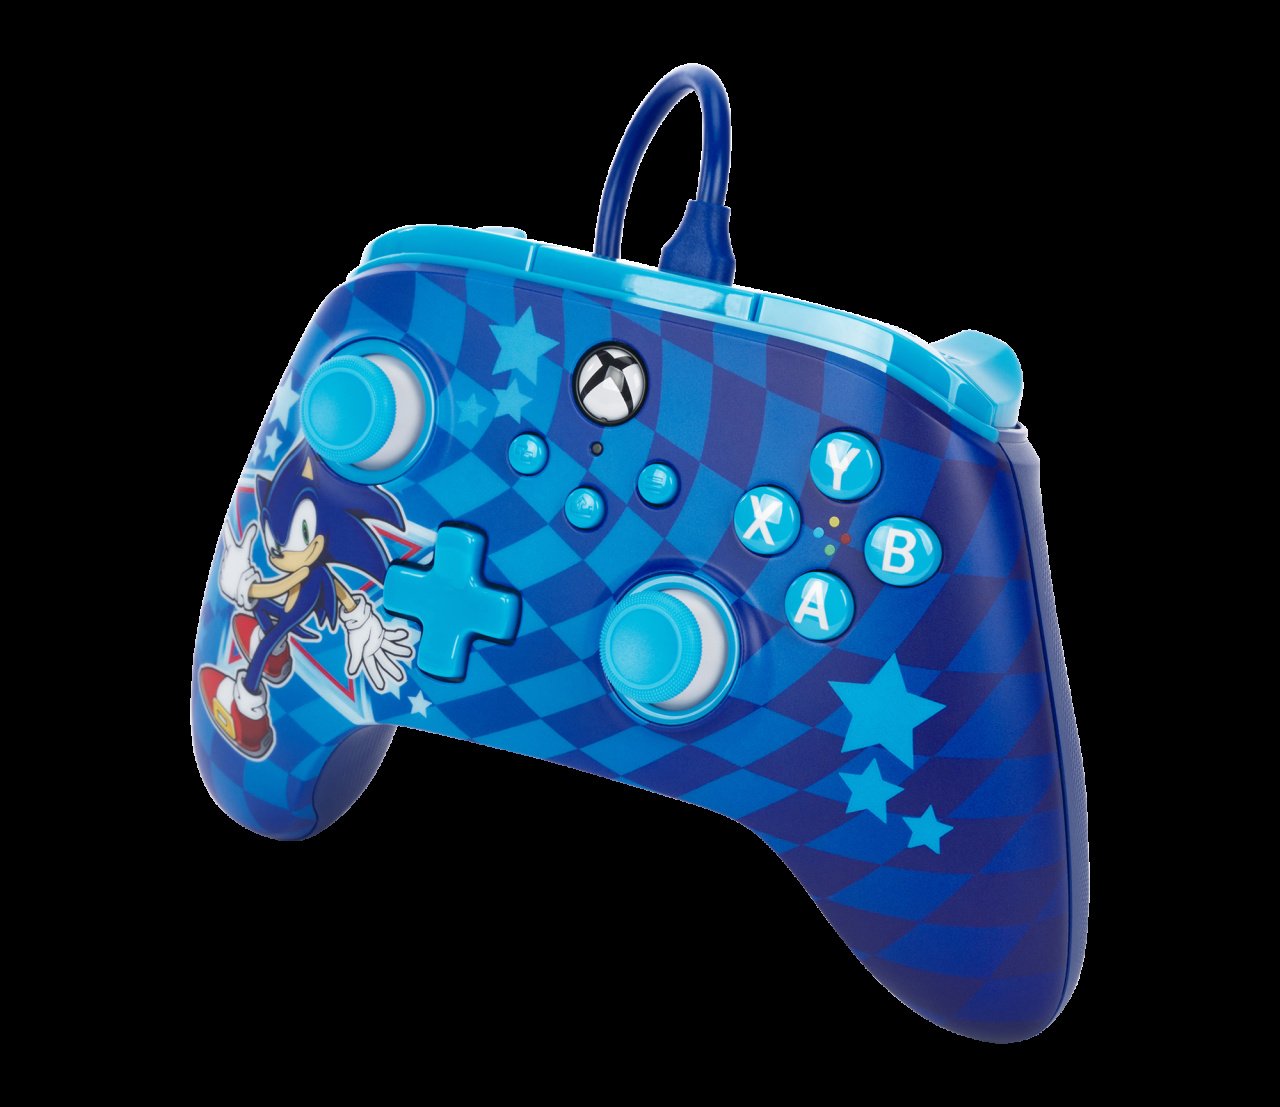 New Sonic gaming accessories from PowerA debut today